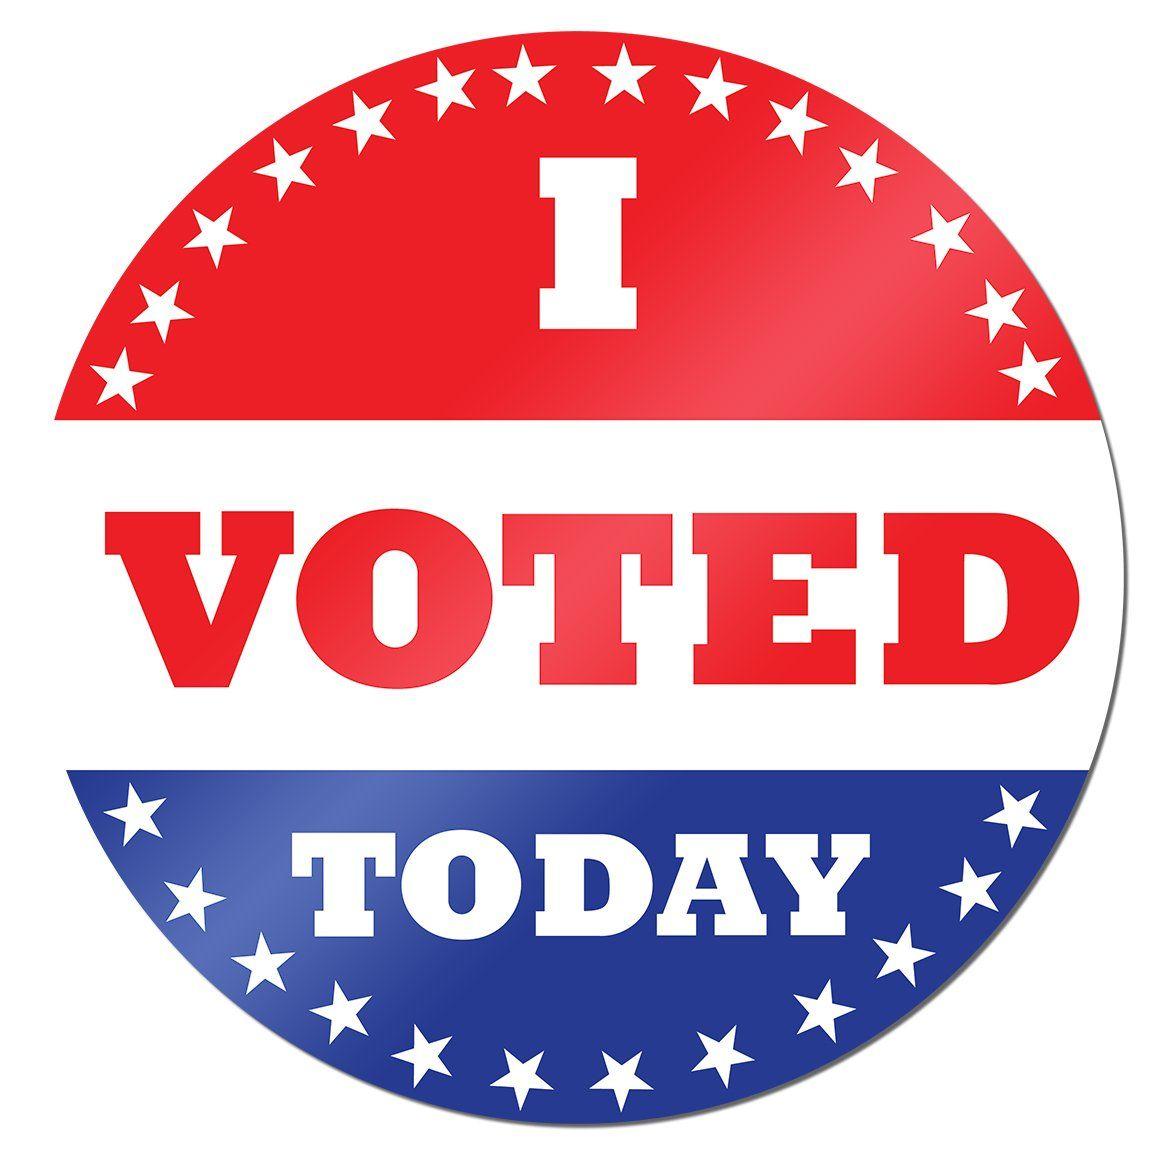 Red White and Blue Circle Logo - Amazon.com : I Voted Today 2 Inch Round Self Adhesive Sticker Red